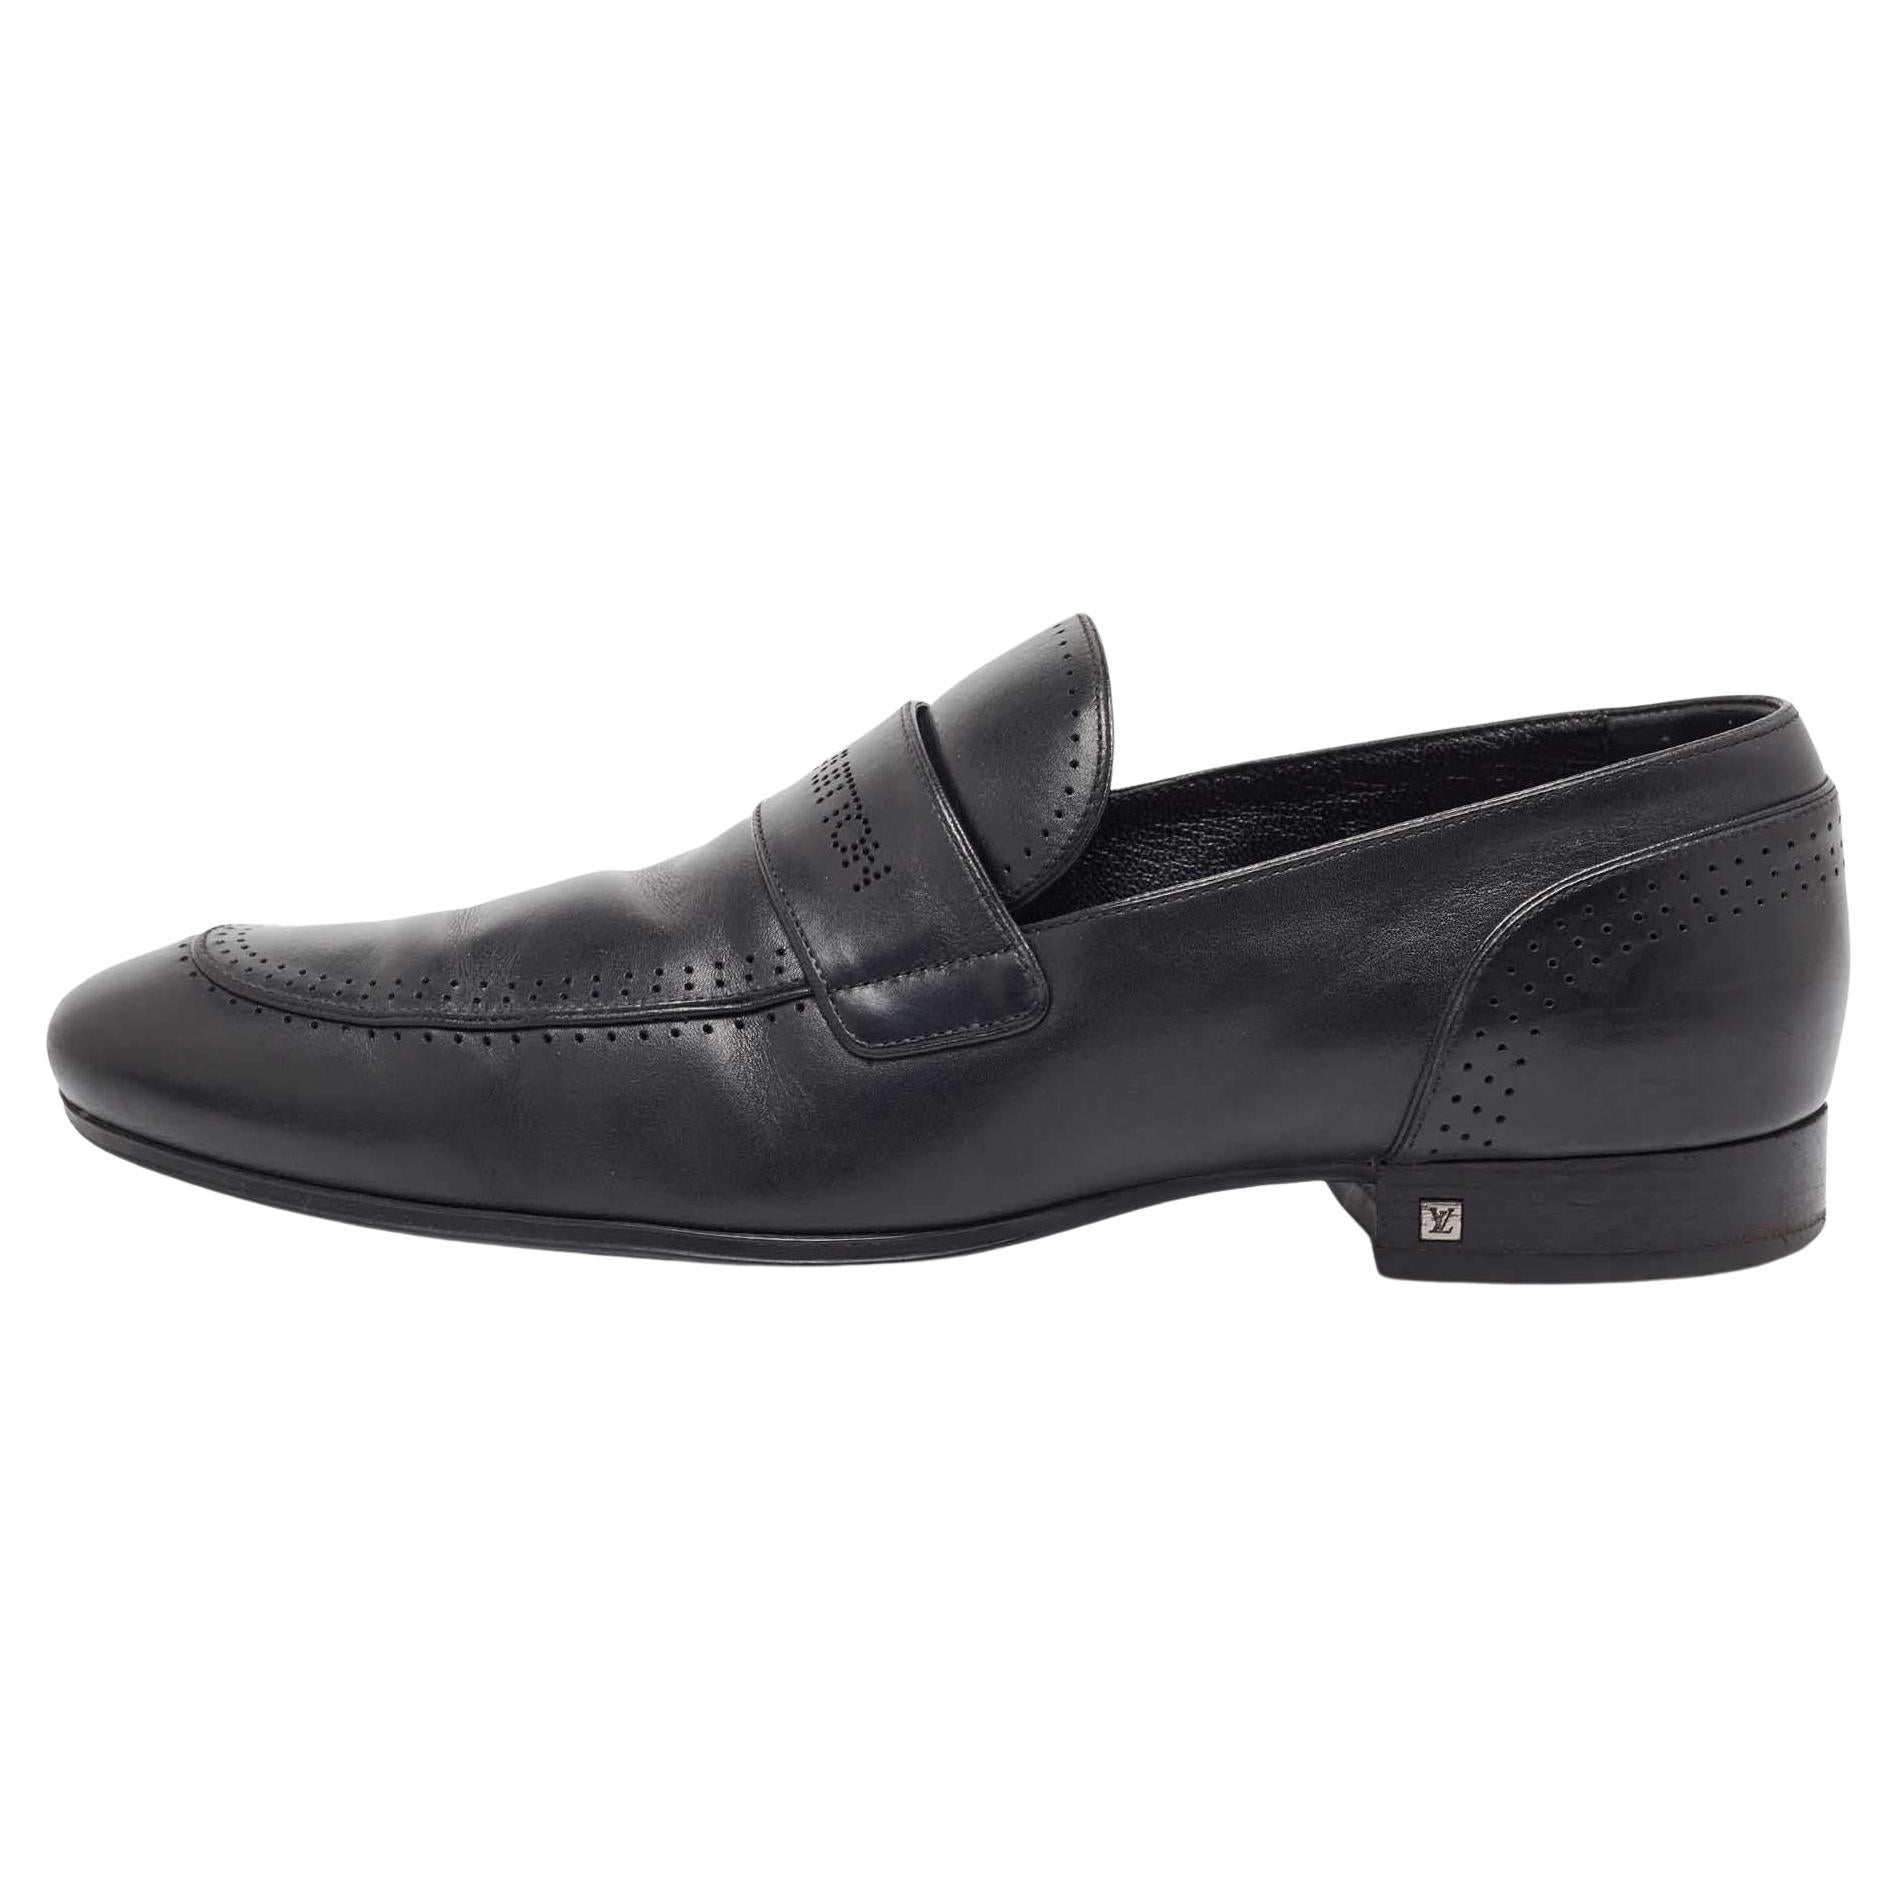 Louis Vuitton Black Leather Slip On Loafers Size 43 For Sale